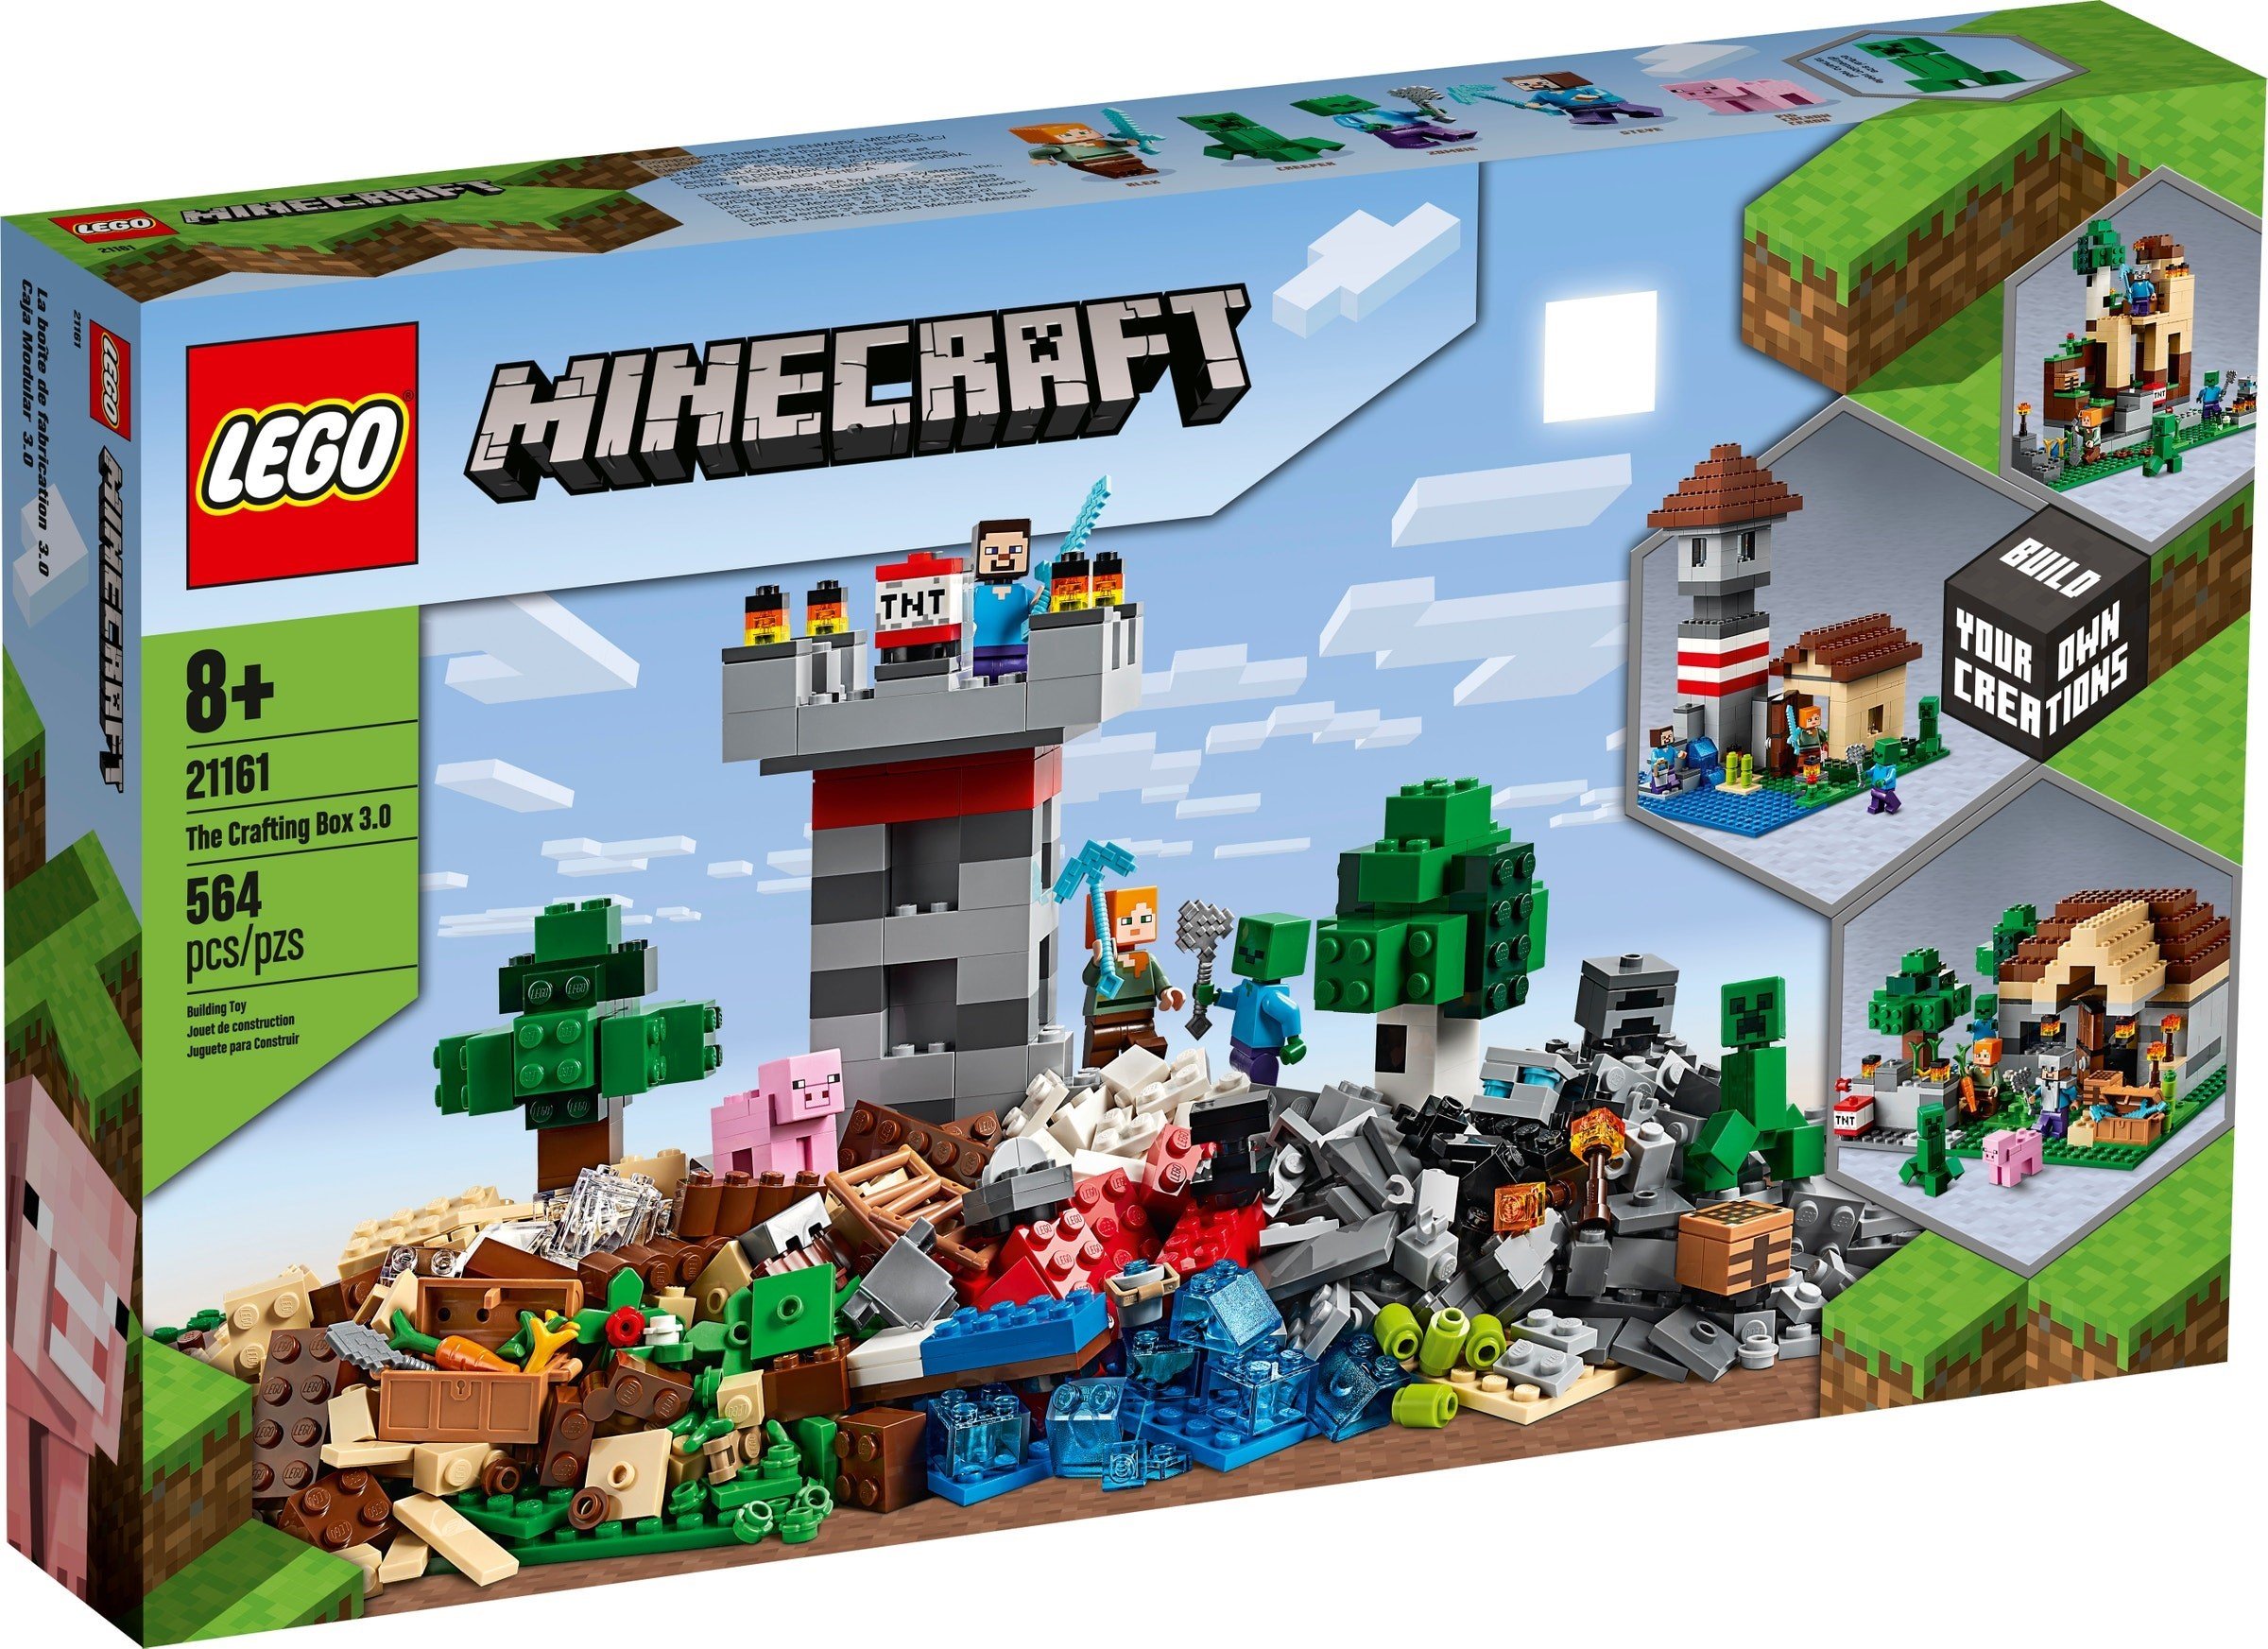 2017 lego sets and lego games